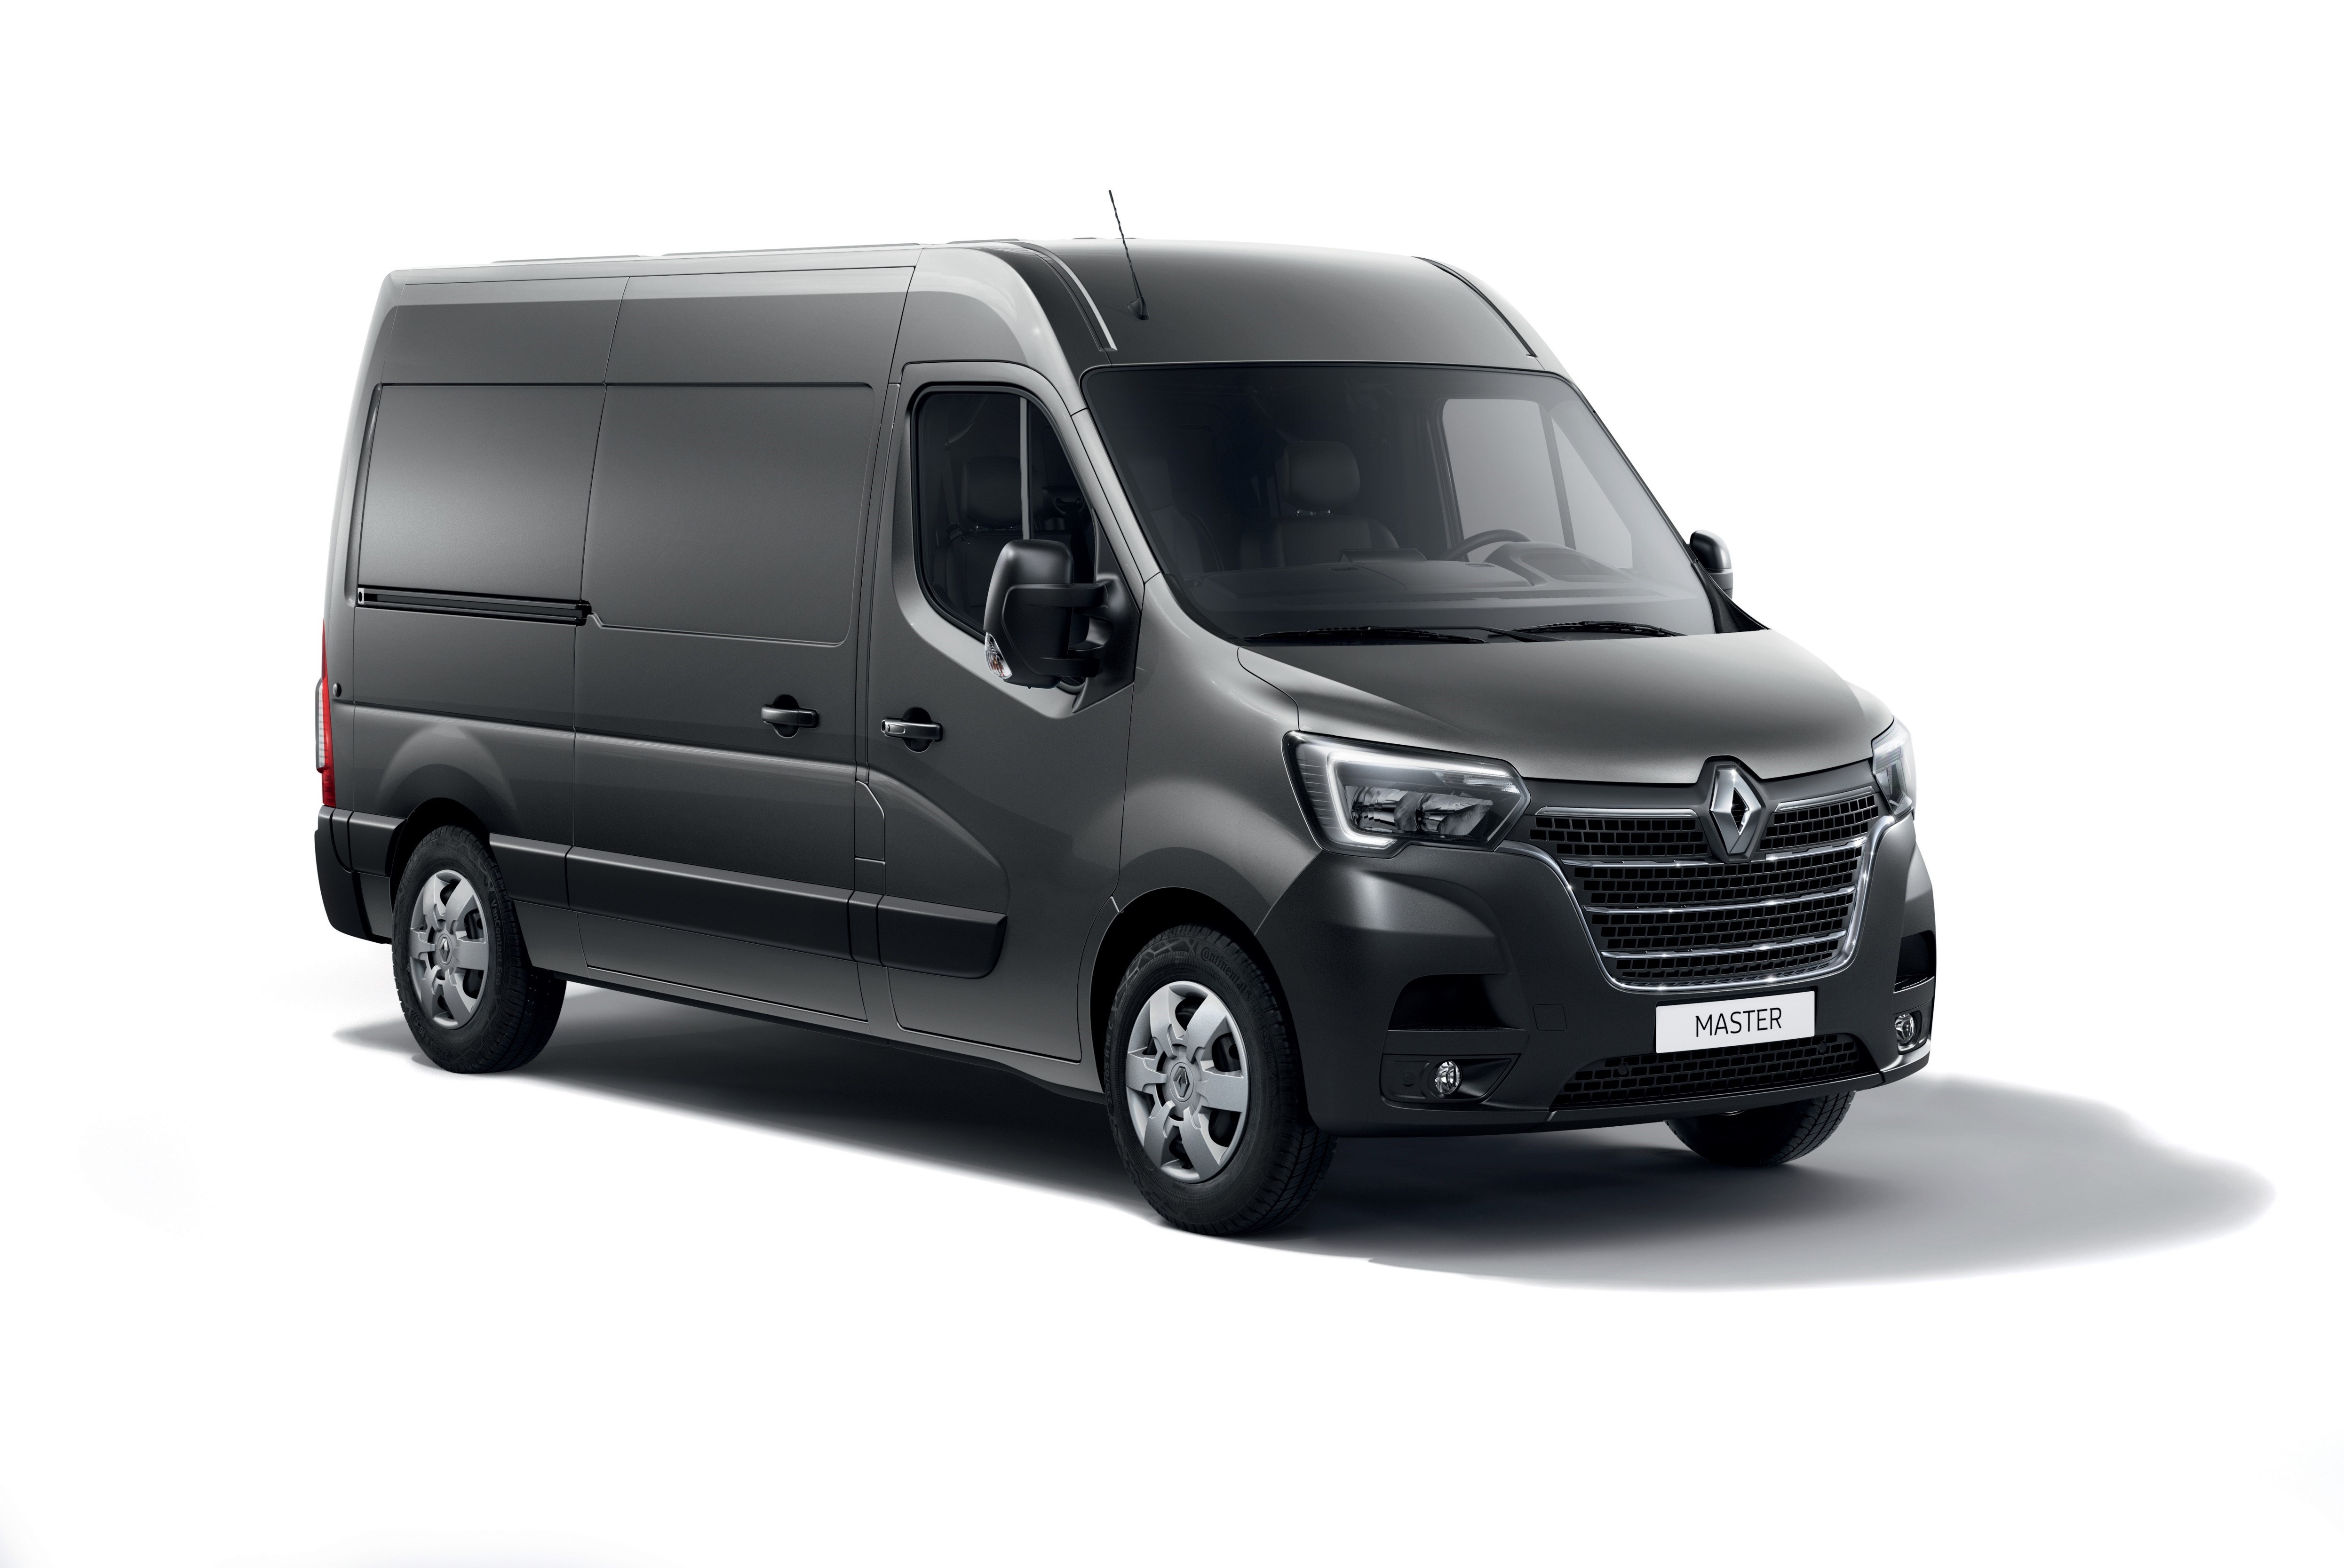 Renault Master Combi hd specifications